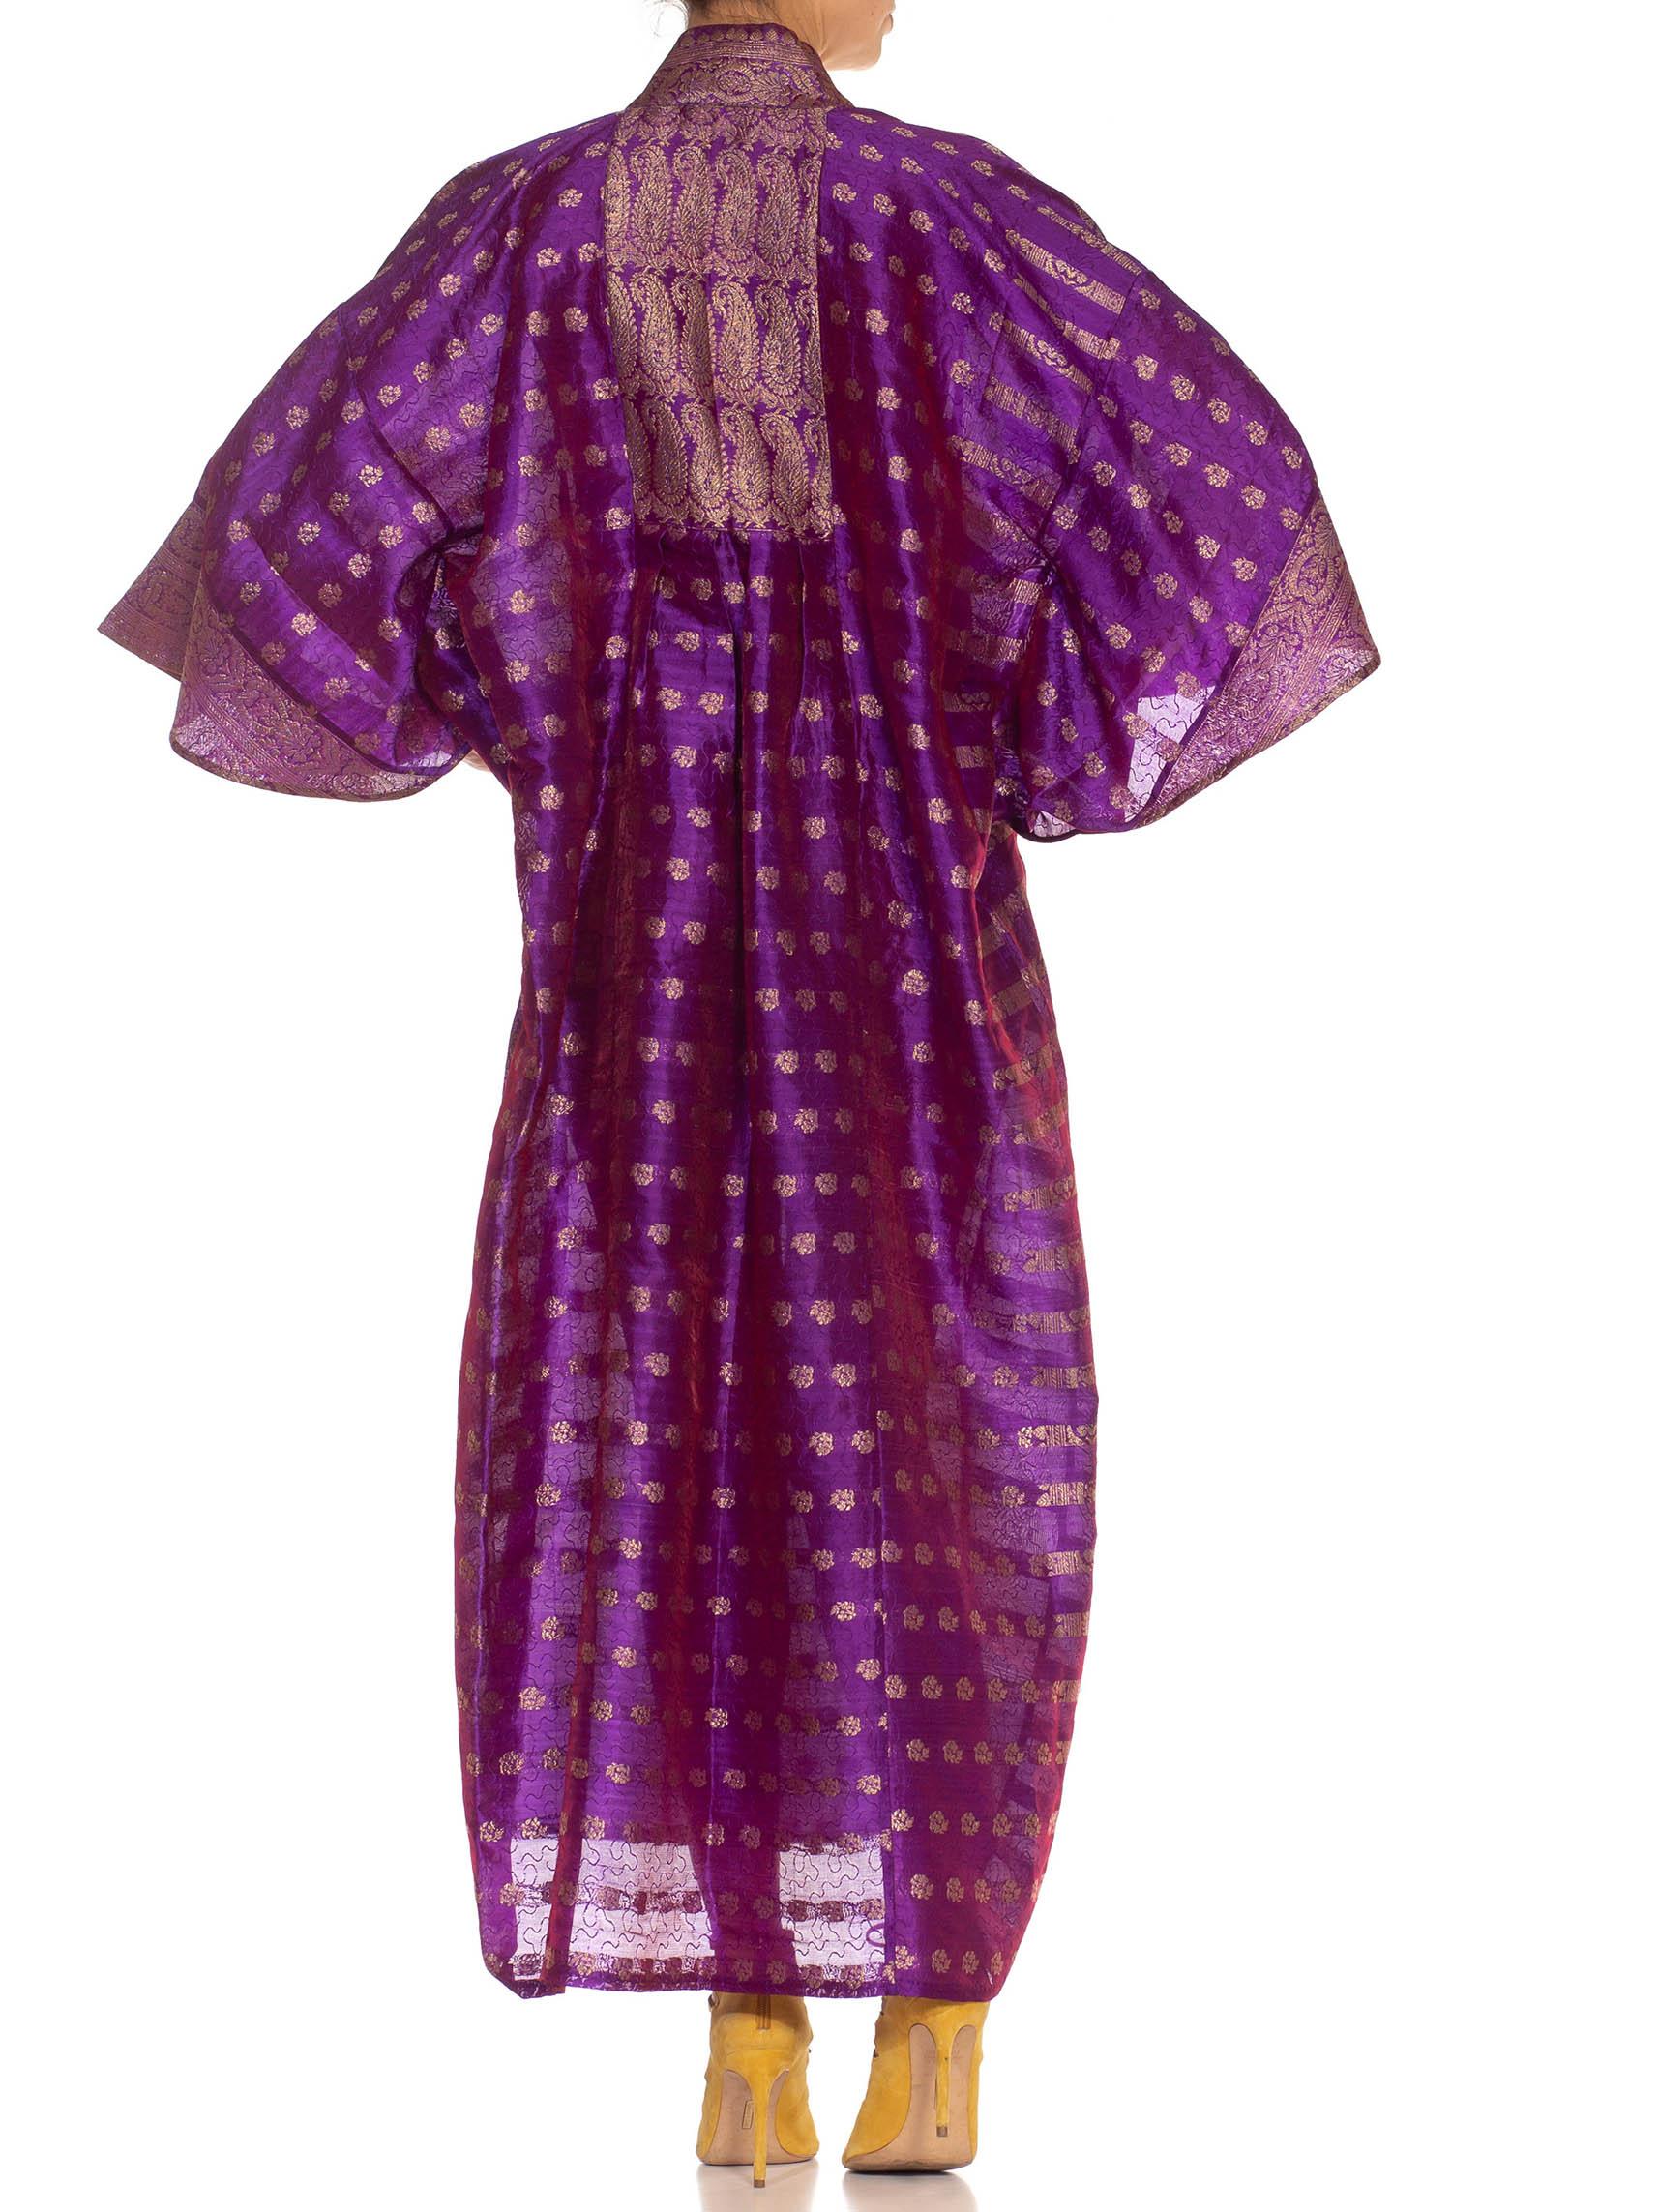 MORPHEW COLLECTION Purple & Gold Silk Kaftan Made From Vintage Saris For Sale 7